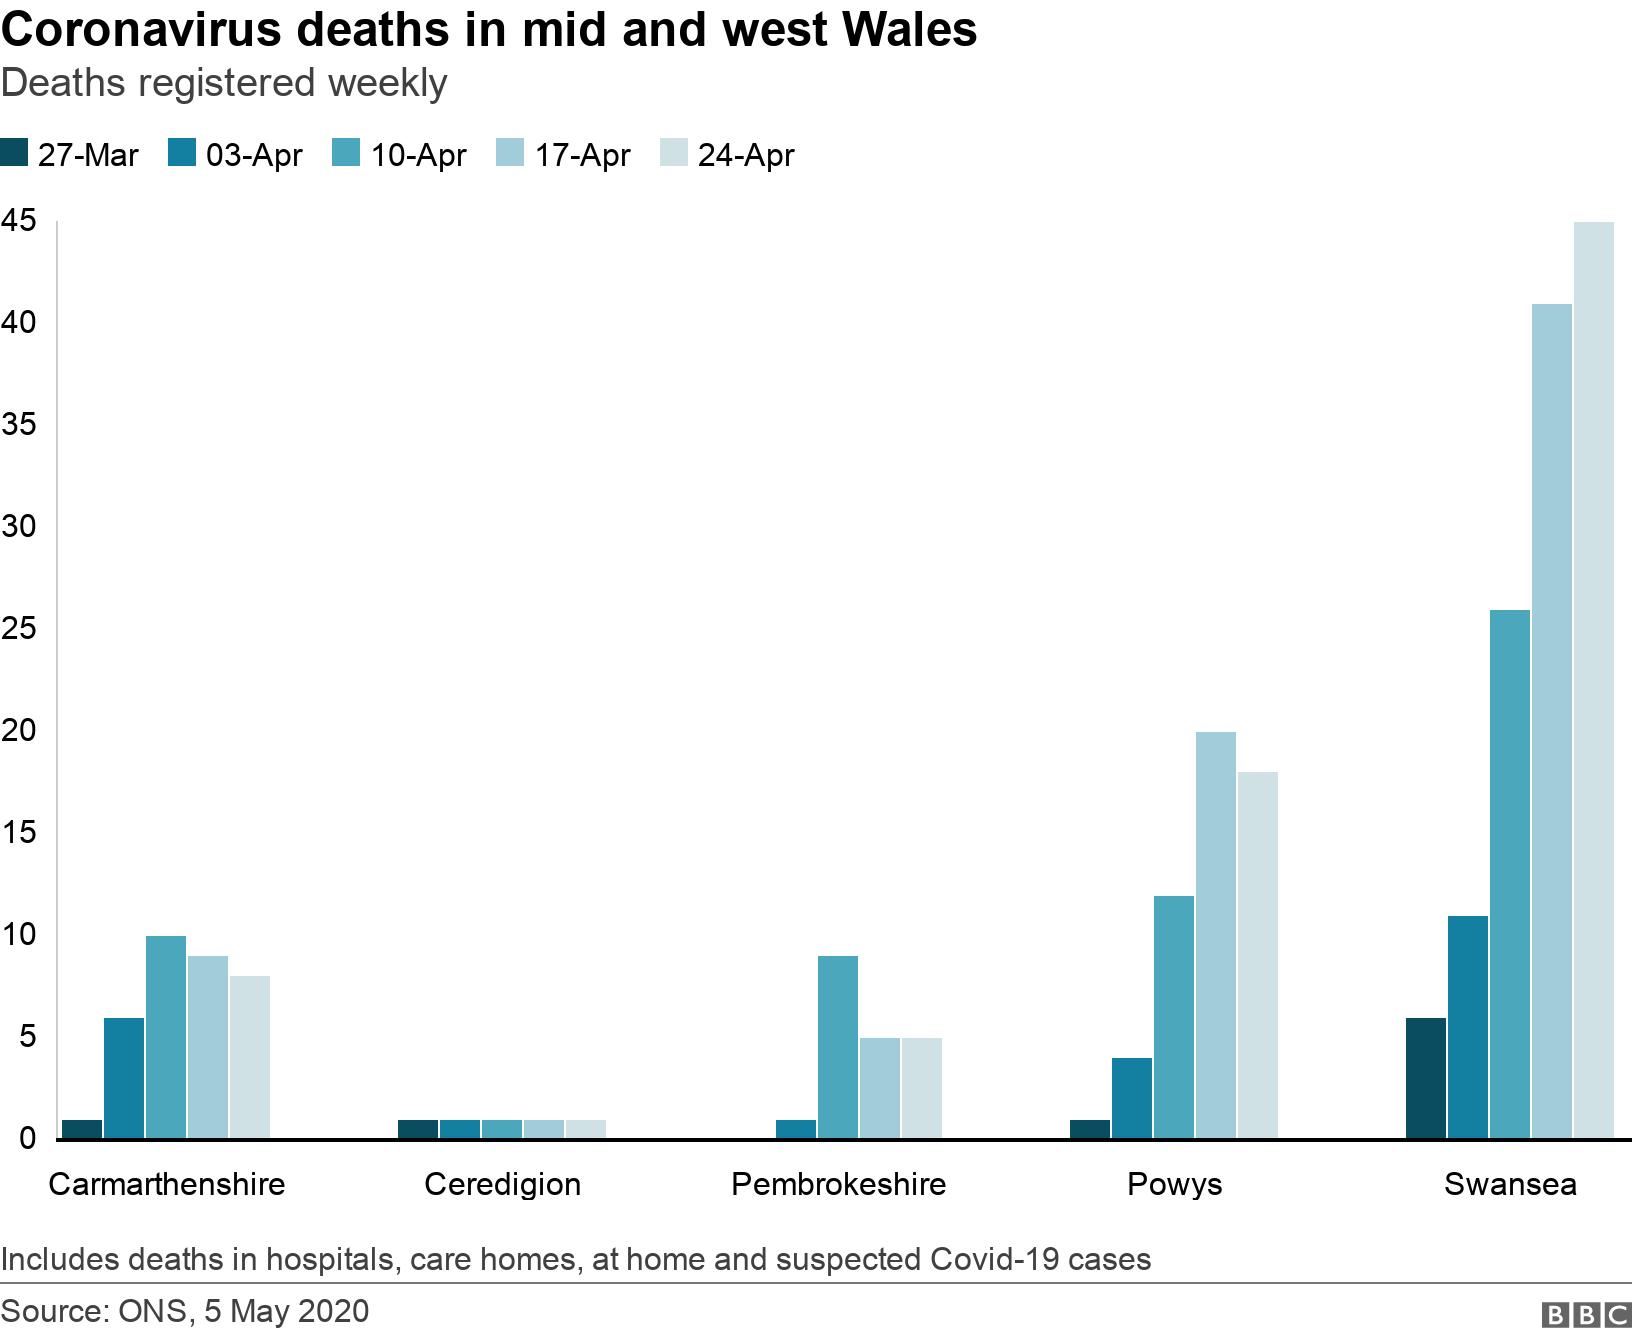 Coronavirus deaths in mid and west Wales. Deaths registered weekly.   Includes deaths in hospitals, care homes, at home and suspected Covid-19 cases.